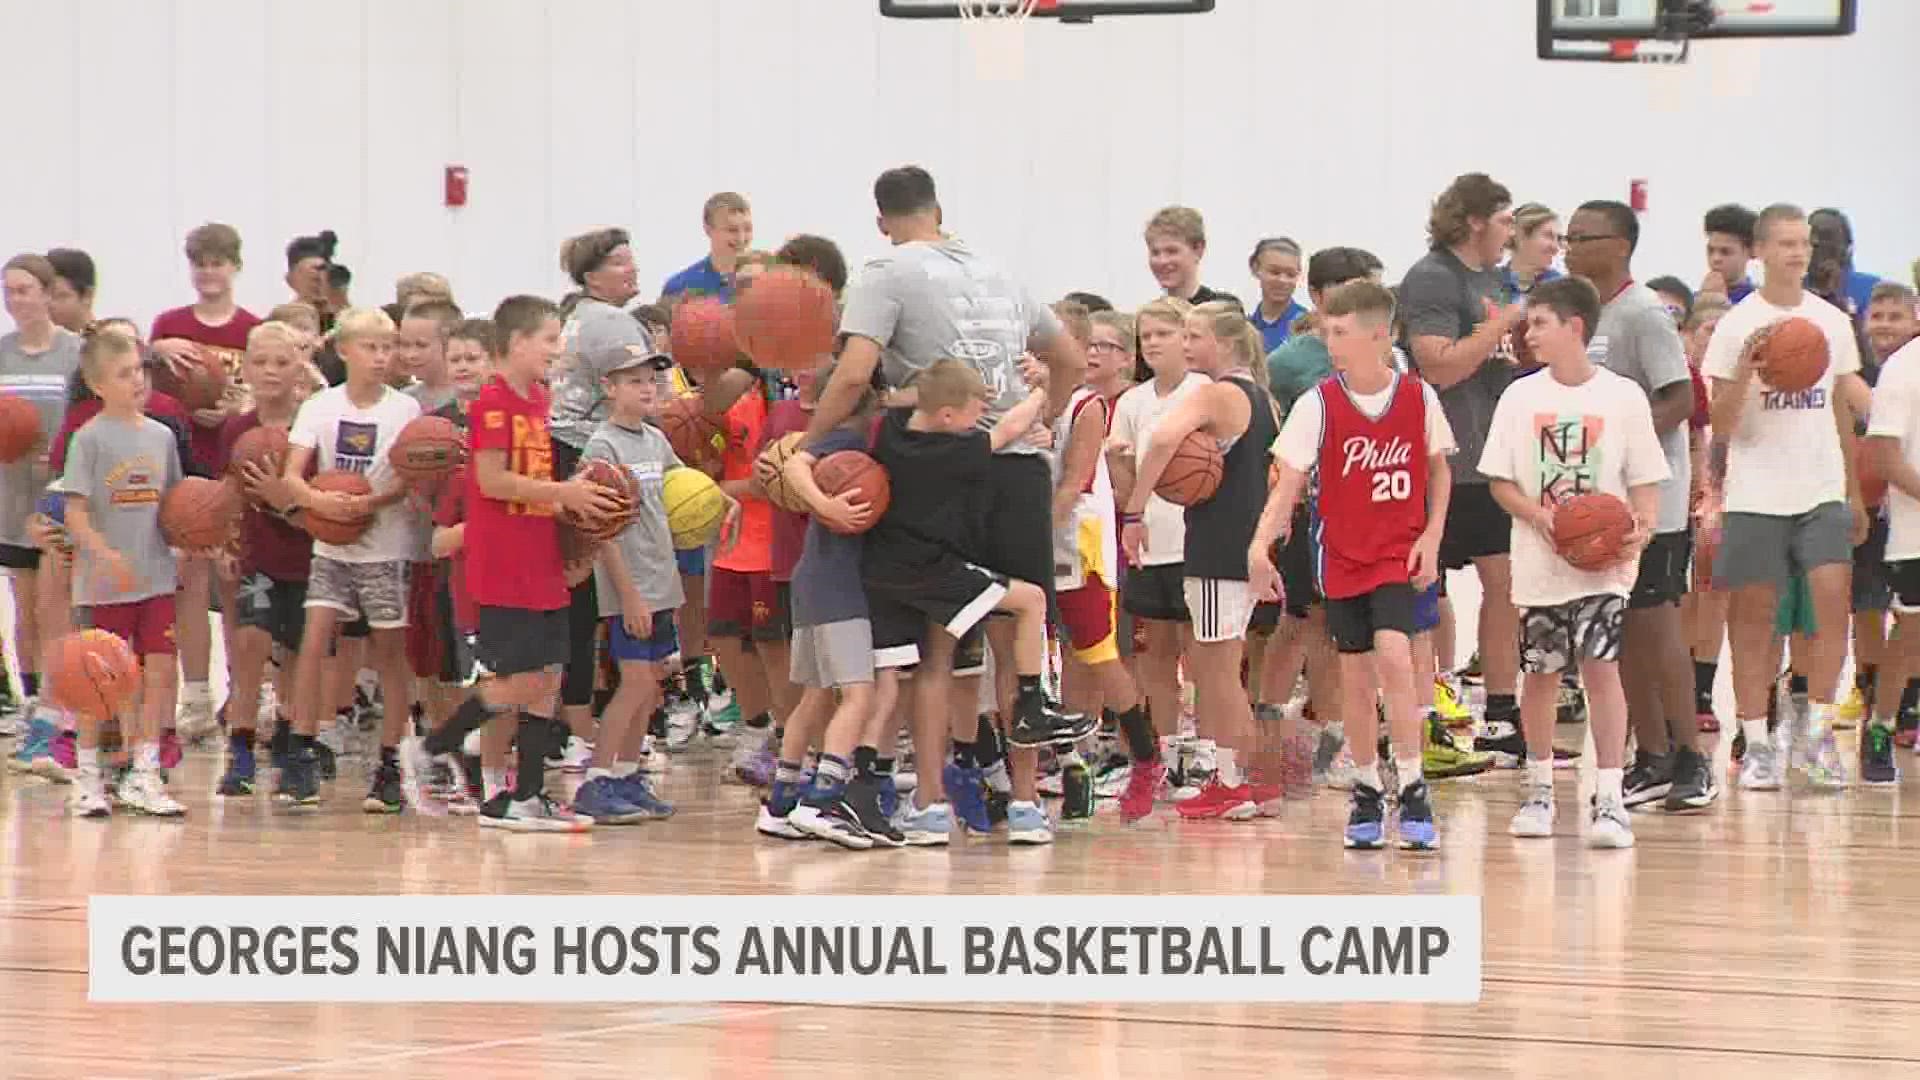 This is his seventh year putting on the camp, and the first year its being held at two locations.